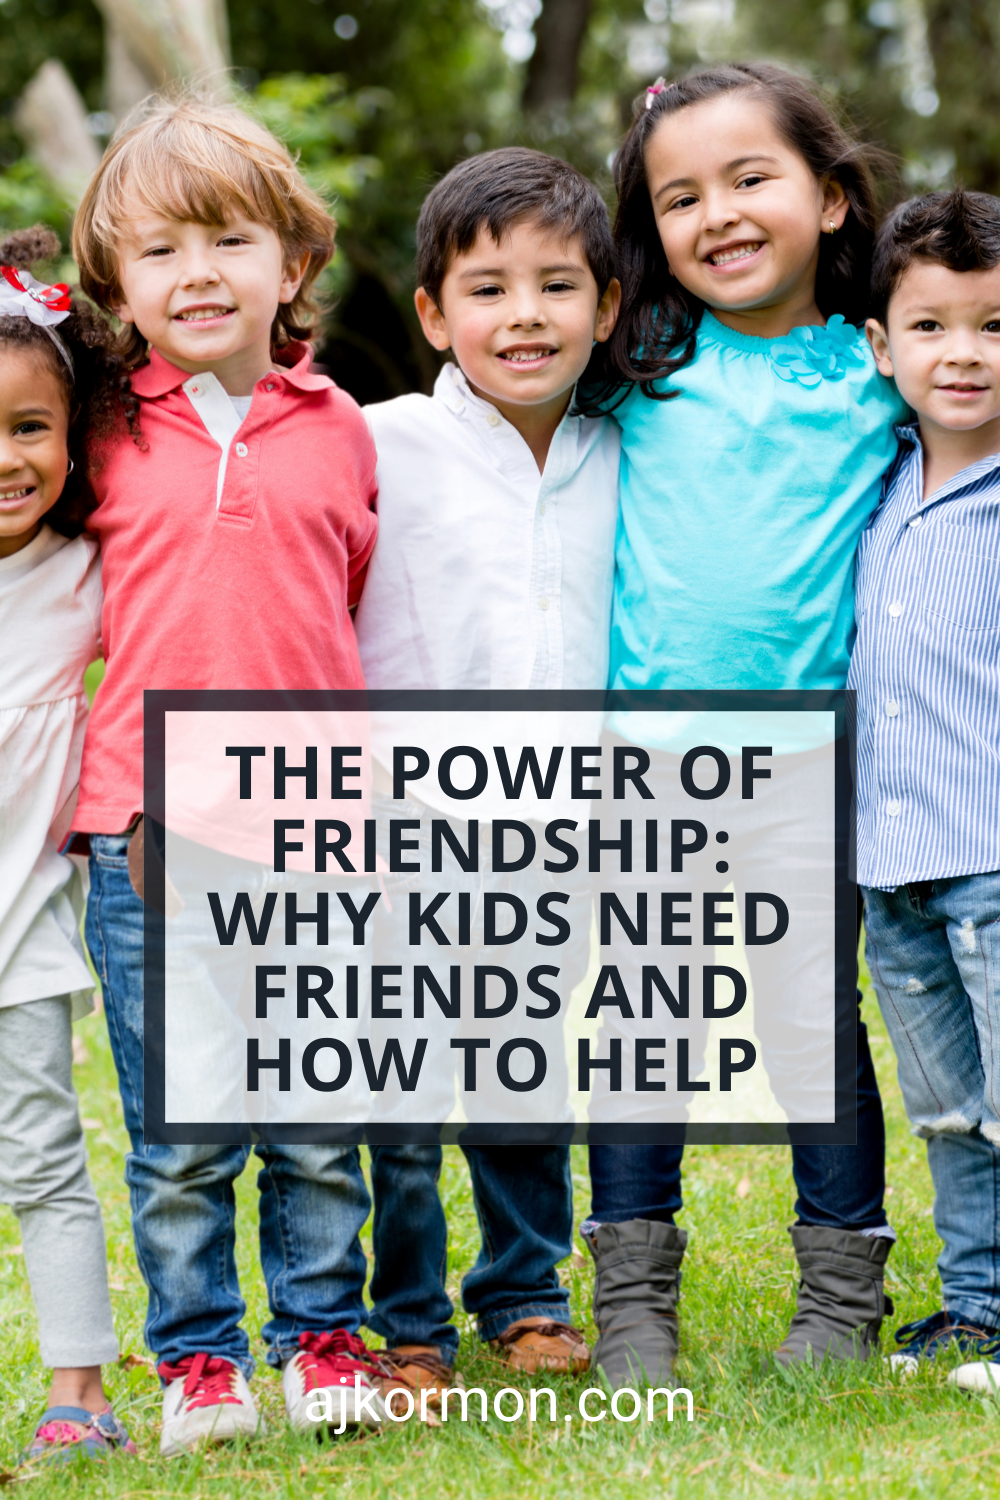 Why Kids Need Friends and How to Help